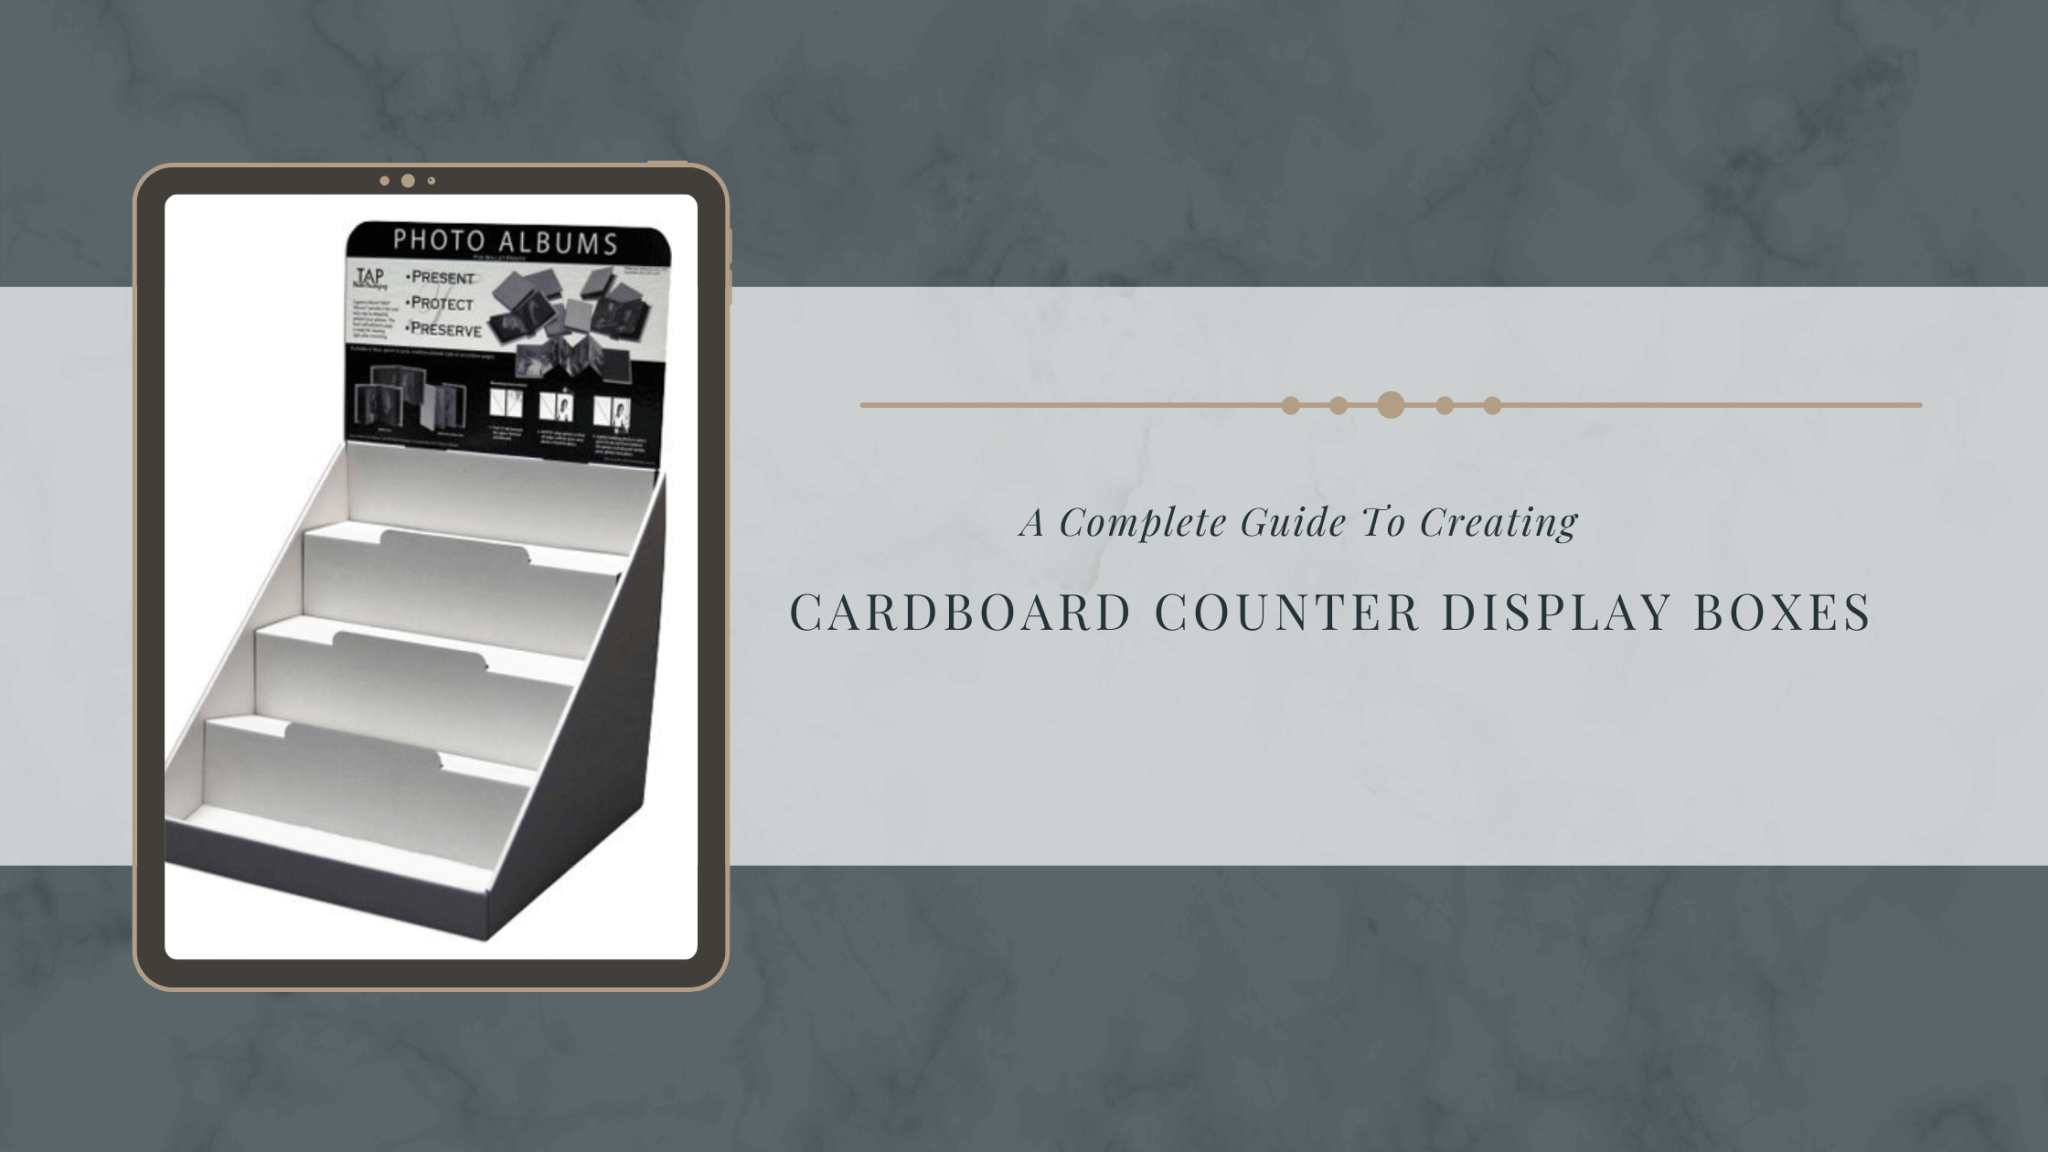 A Complete Guide To Creating Cardboard Counter Display